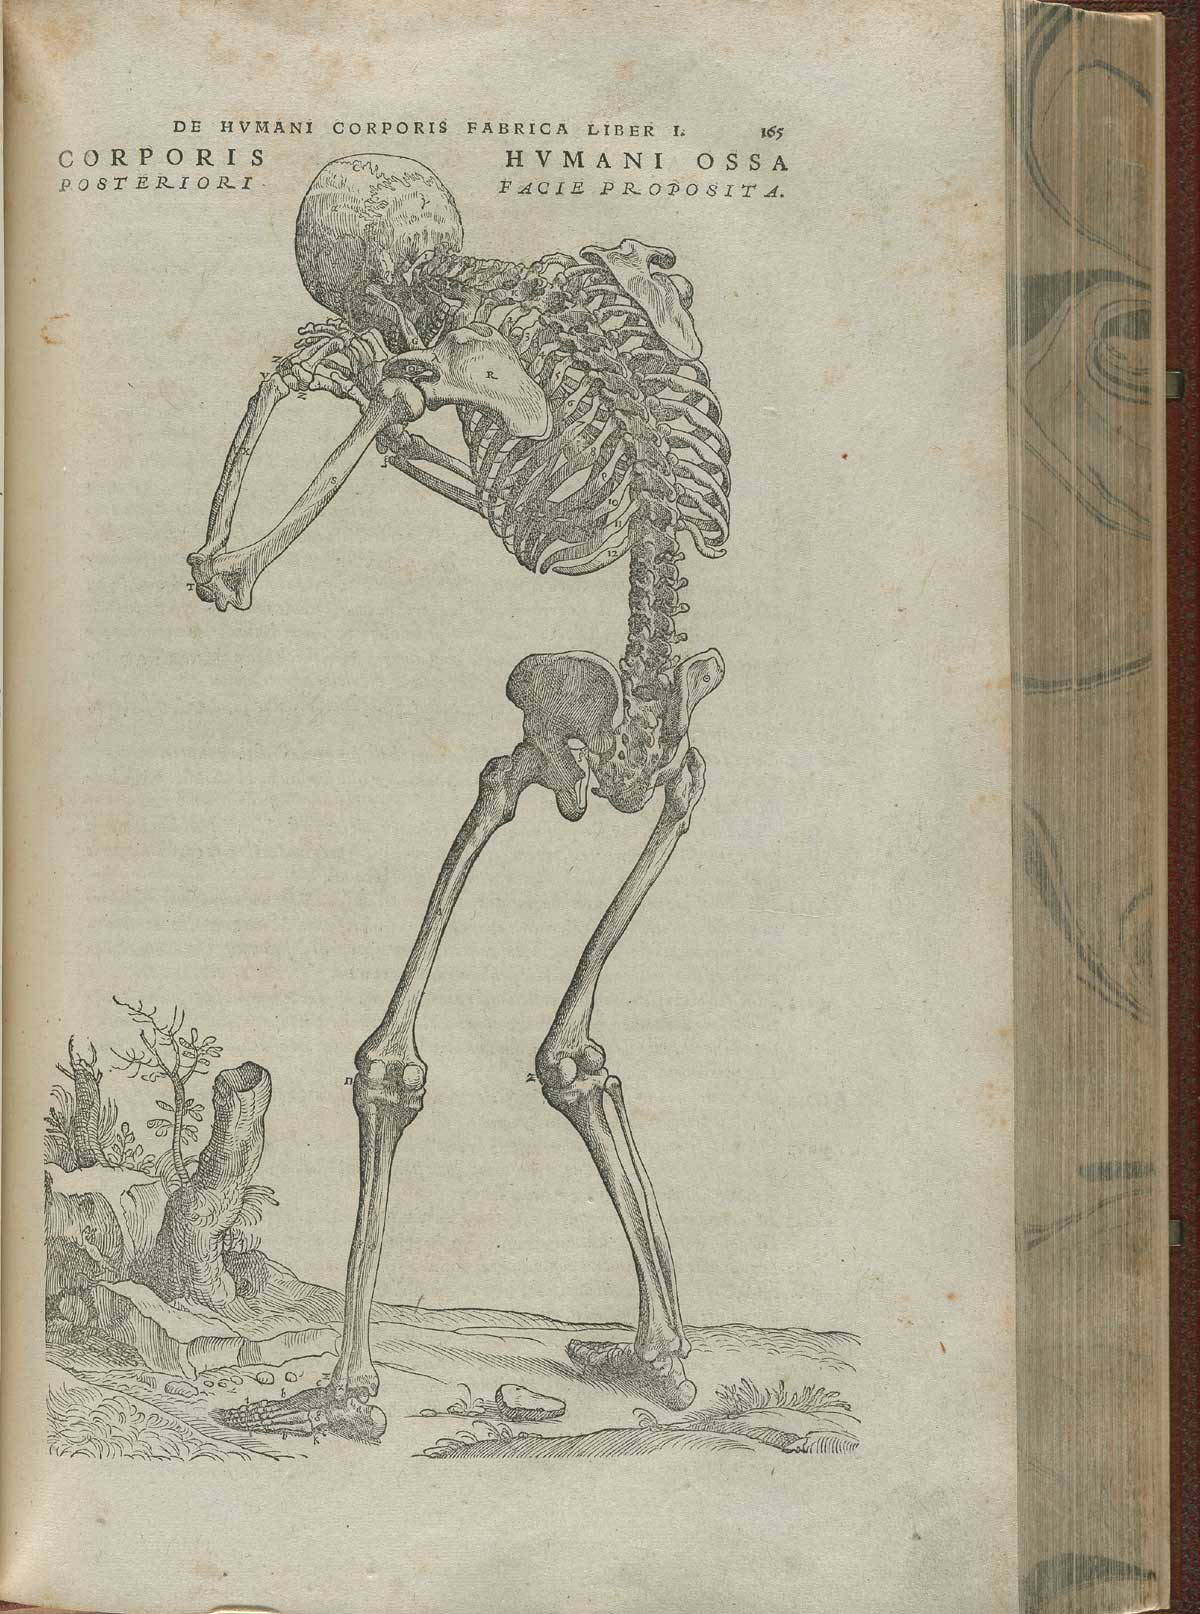 Page 165 of Andreas Vesalius' De corporis humani fabrica libri septem, featuring the illustrated woodcut of the posterior view of a skeleton that is standing and leaning on its hands.